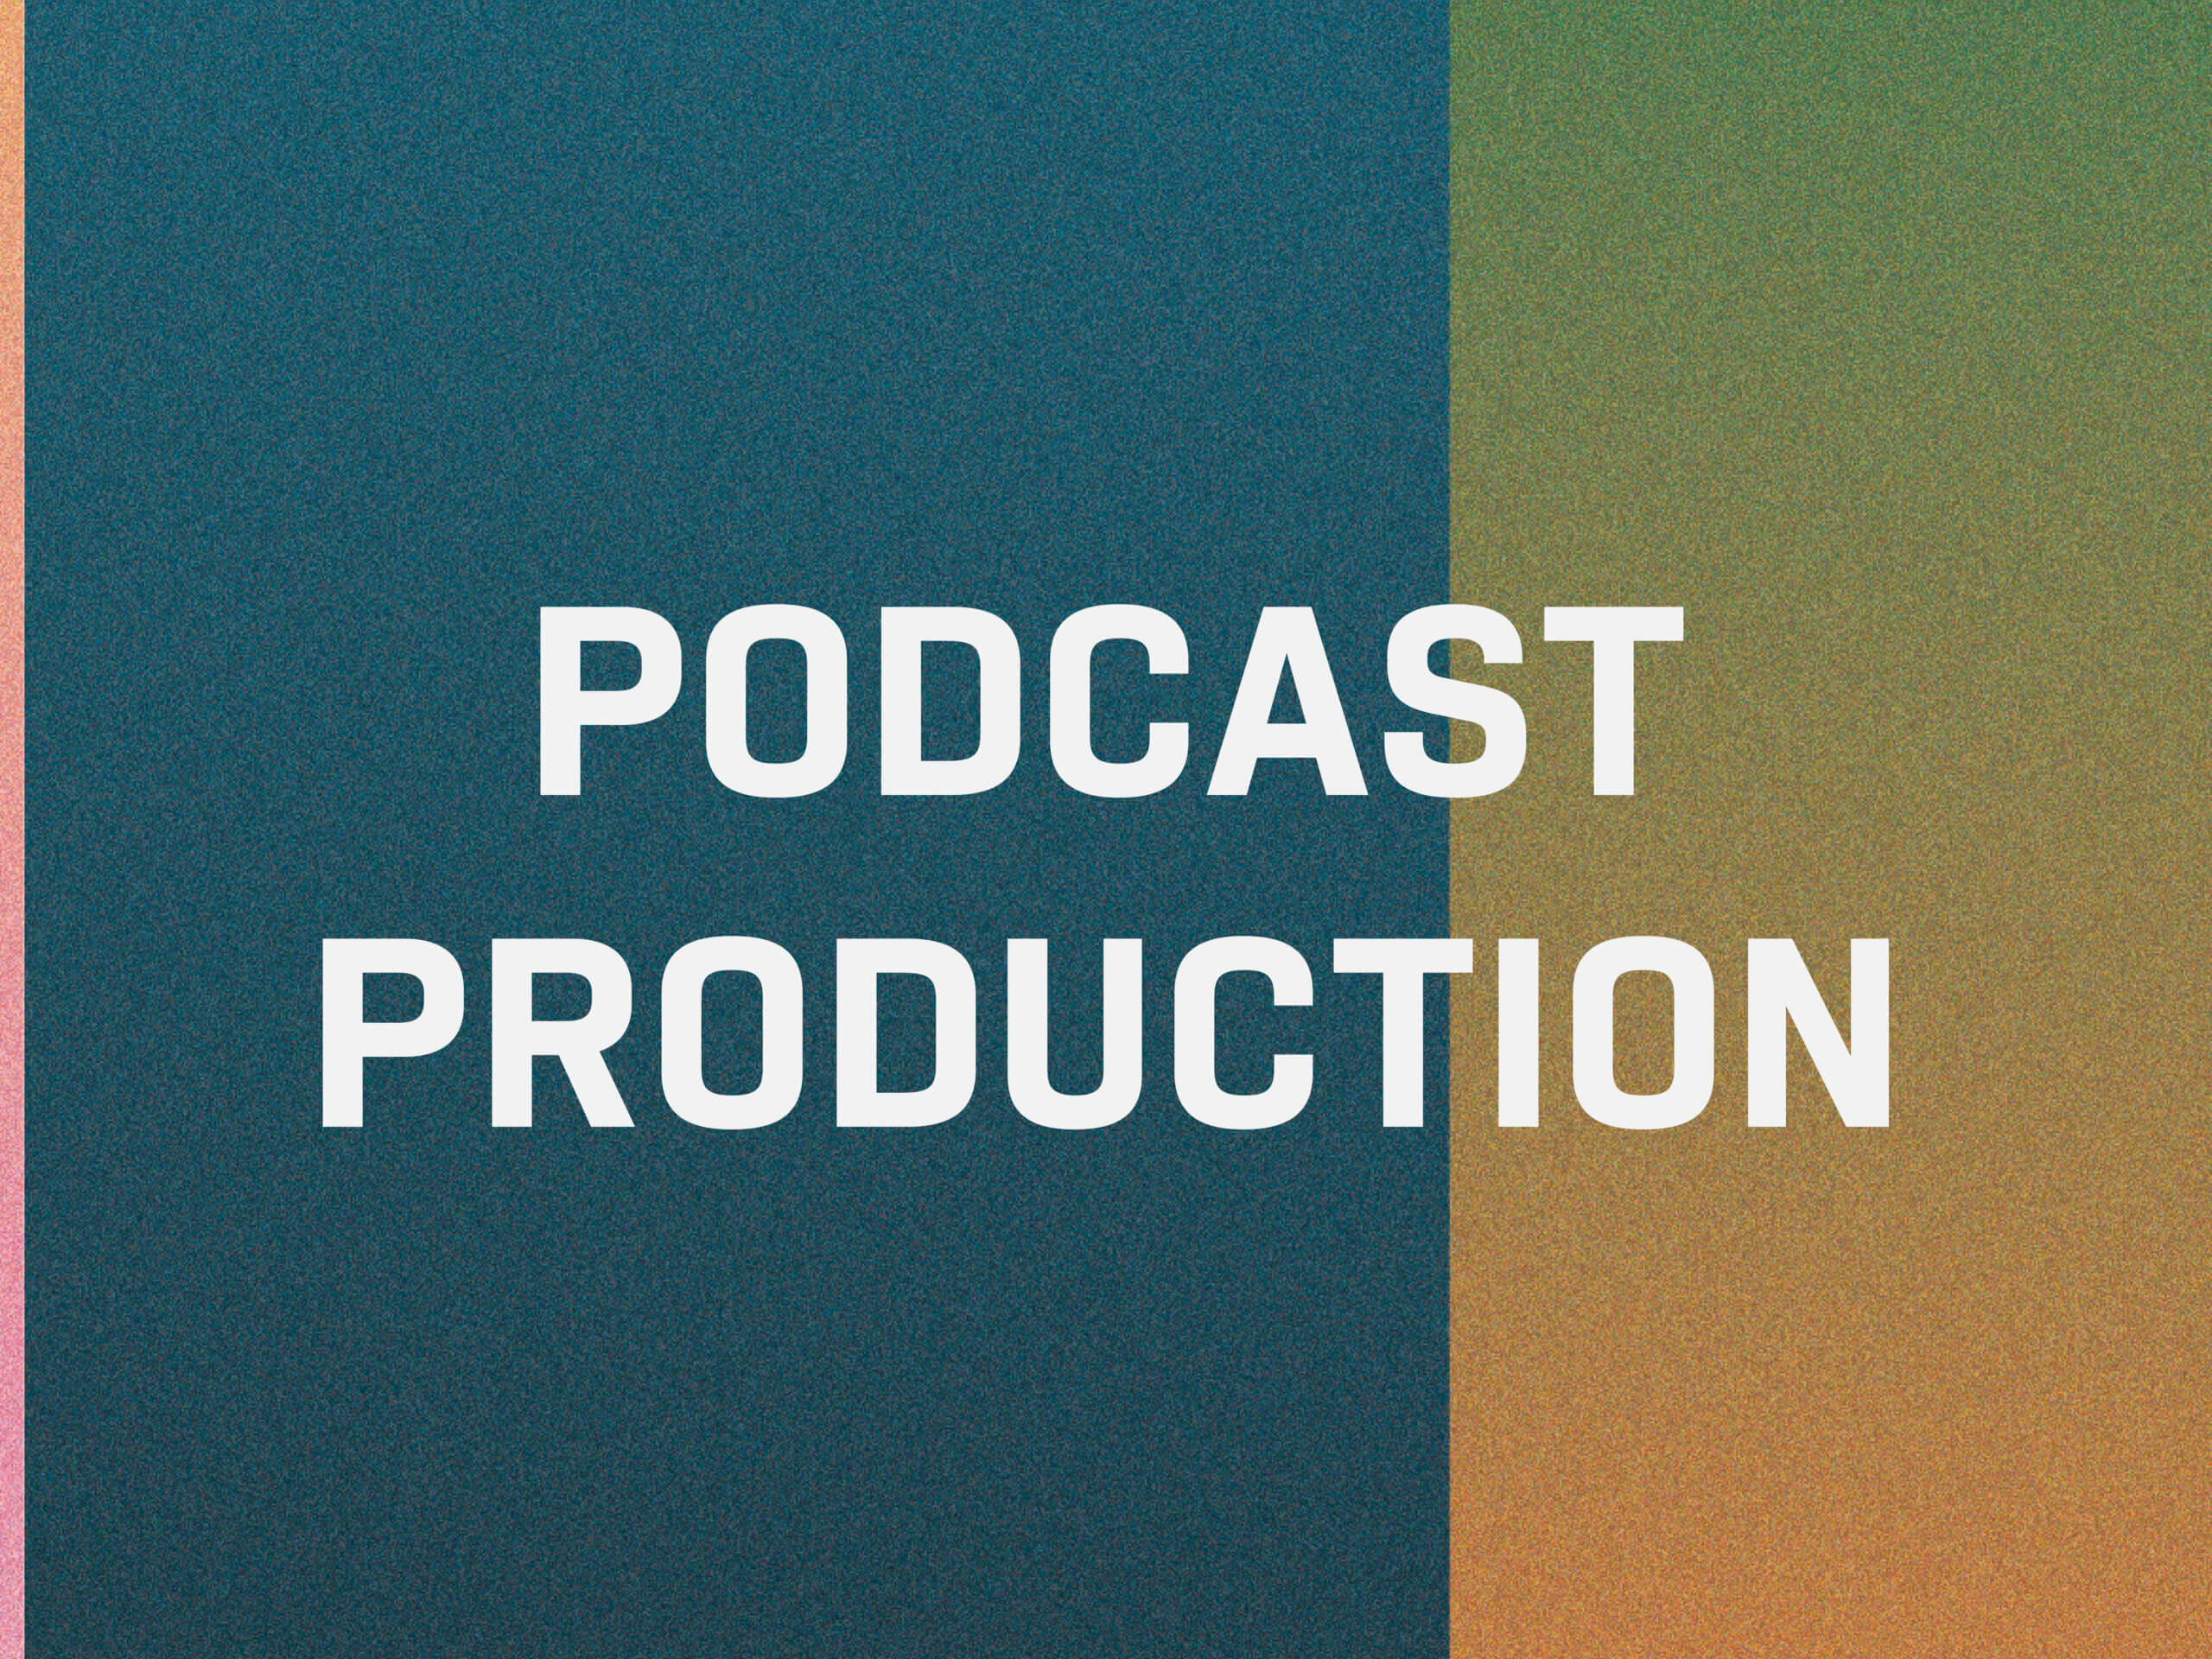 Featured image for “PODCAST PRODUCTION COURSE IN SEPTEMBER”